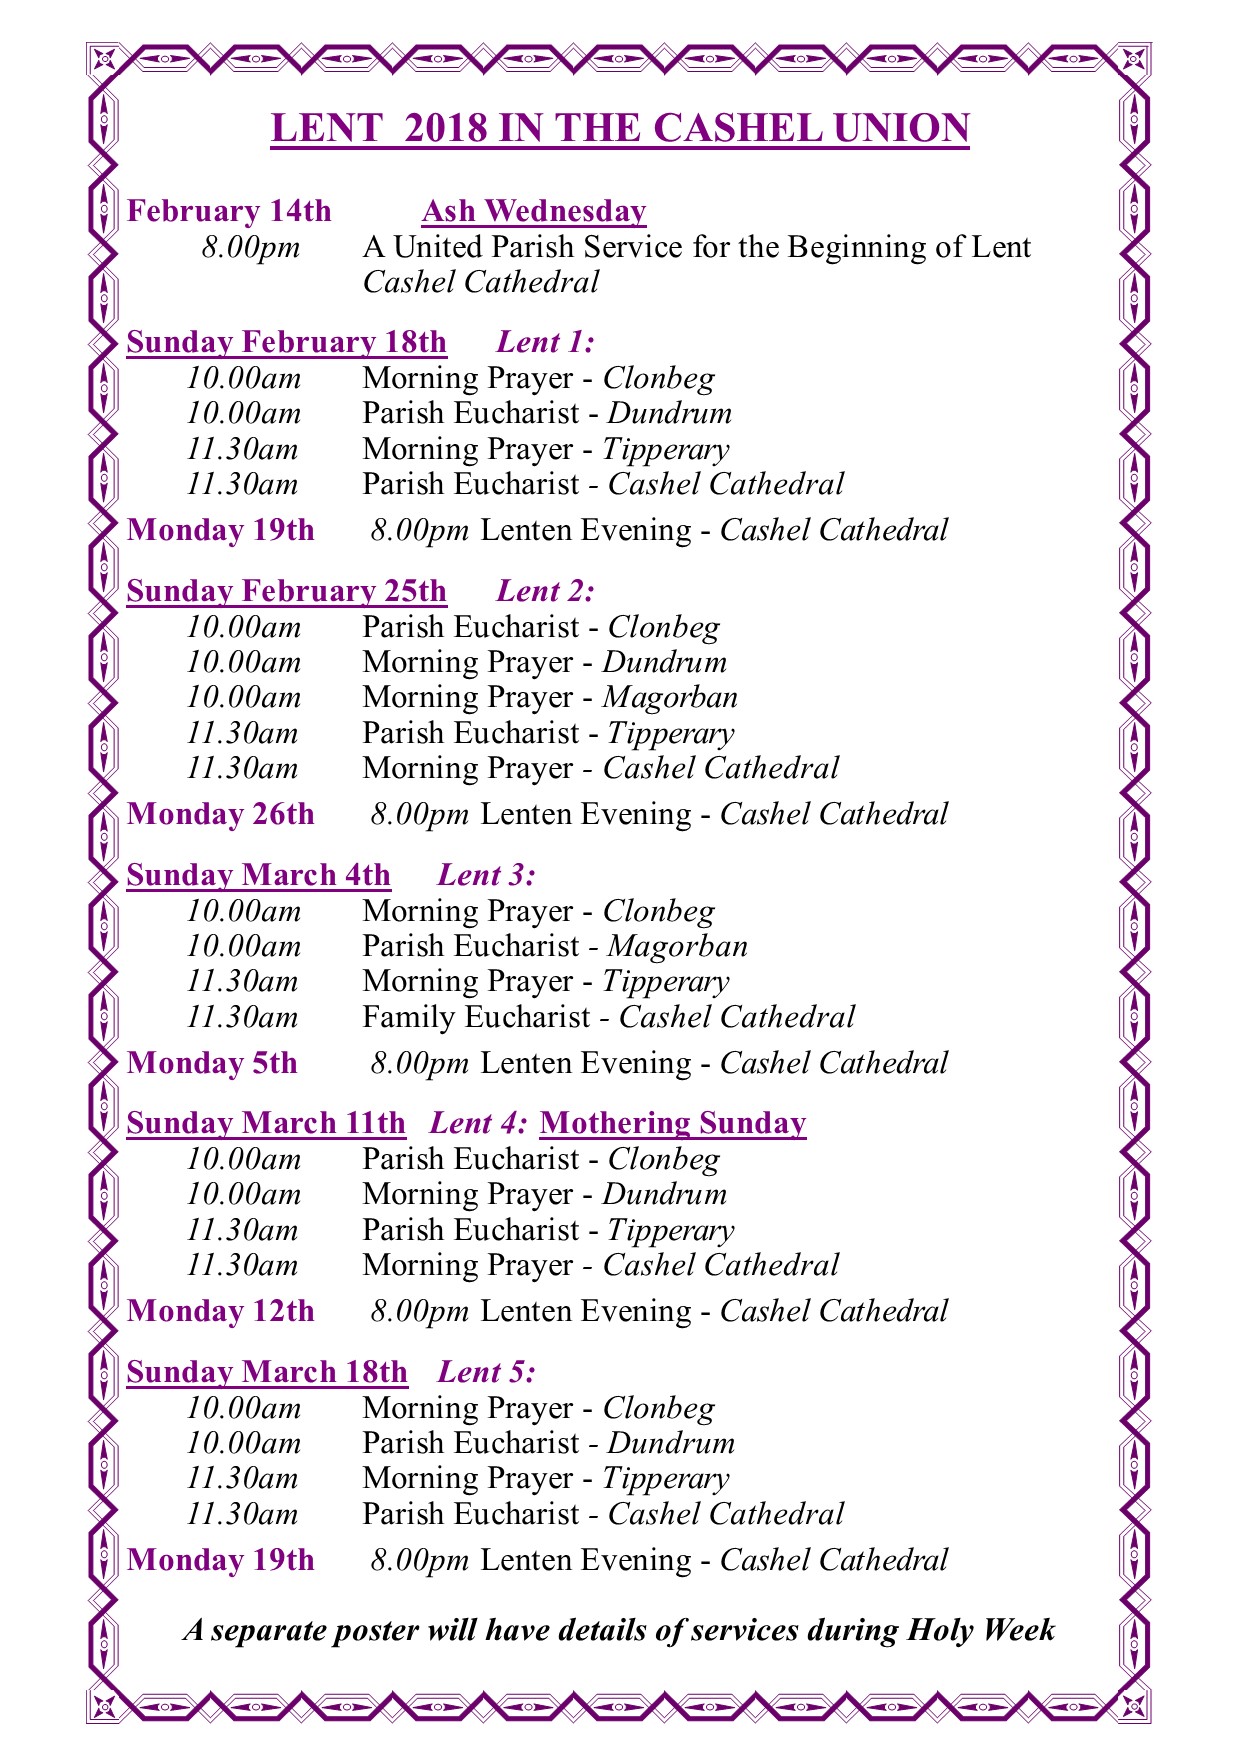 Lent Services Churches and Times 2018